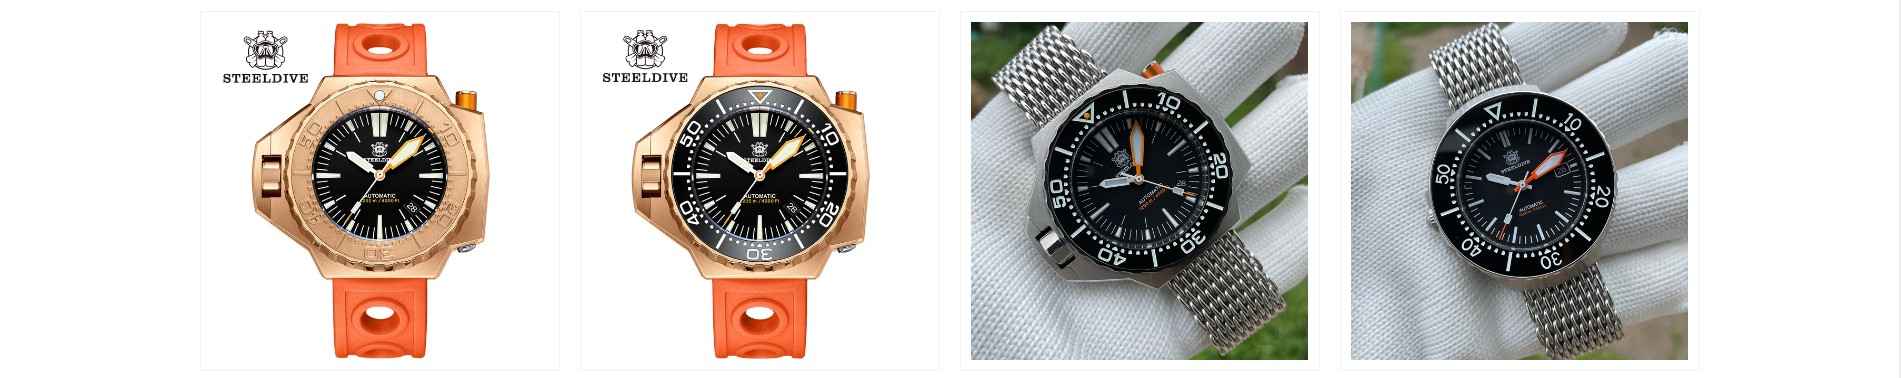 Ploprof Watch AliExpress: Genuine Quality and Unmatched Value